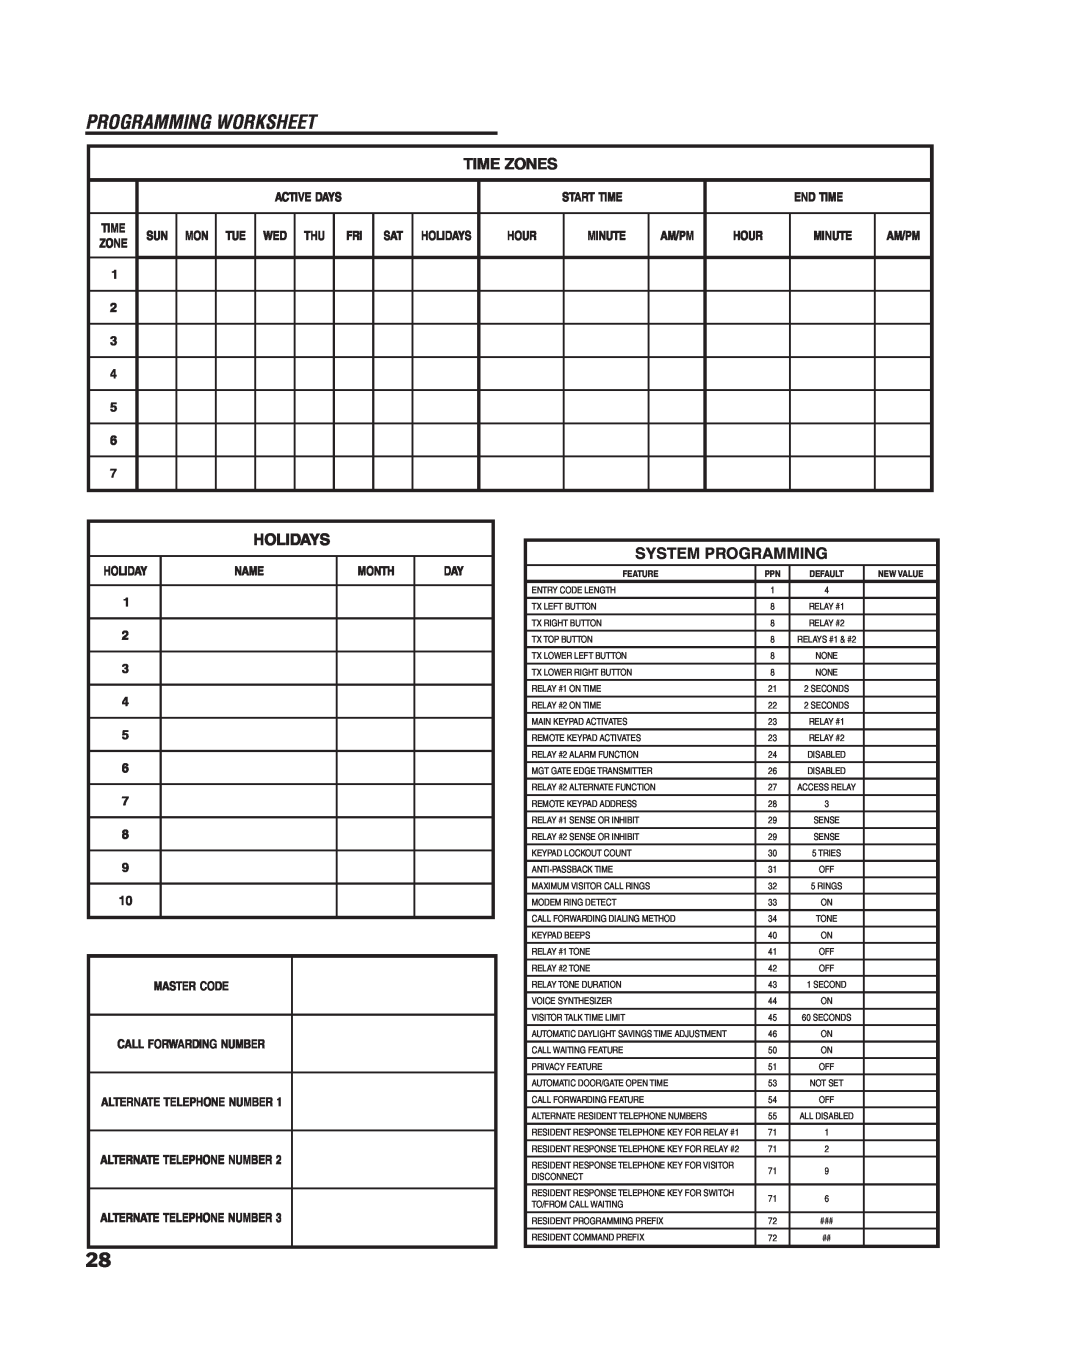 Linear RE-1 Programming Worksheet, Time Zones, Holidays, System Programming, Active Days, Start Time, End Time, Hour, Name 